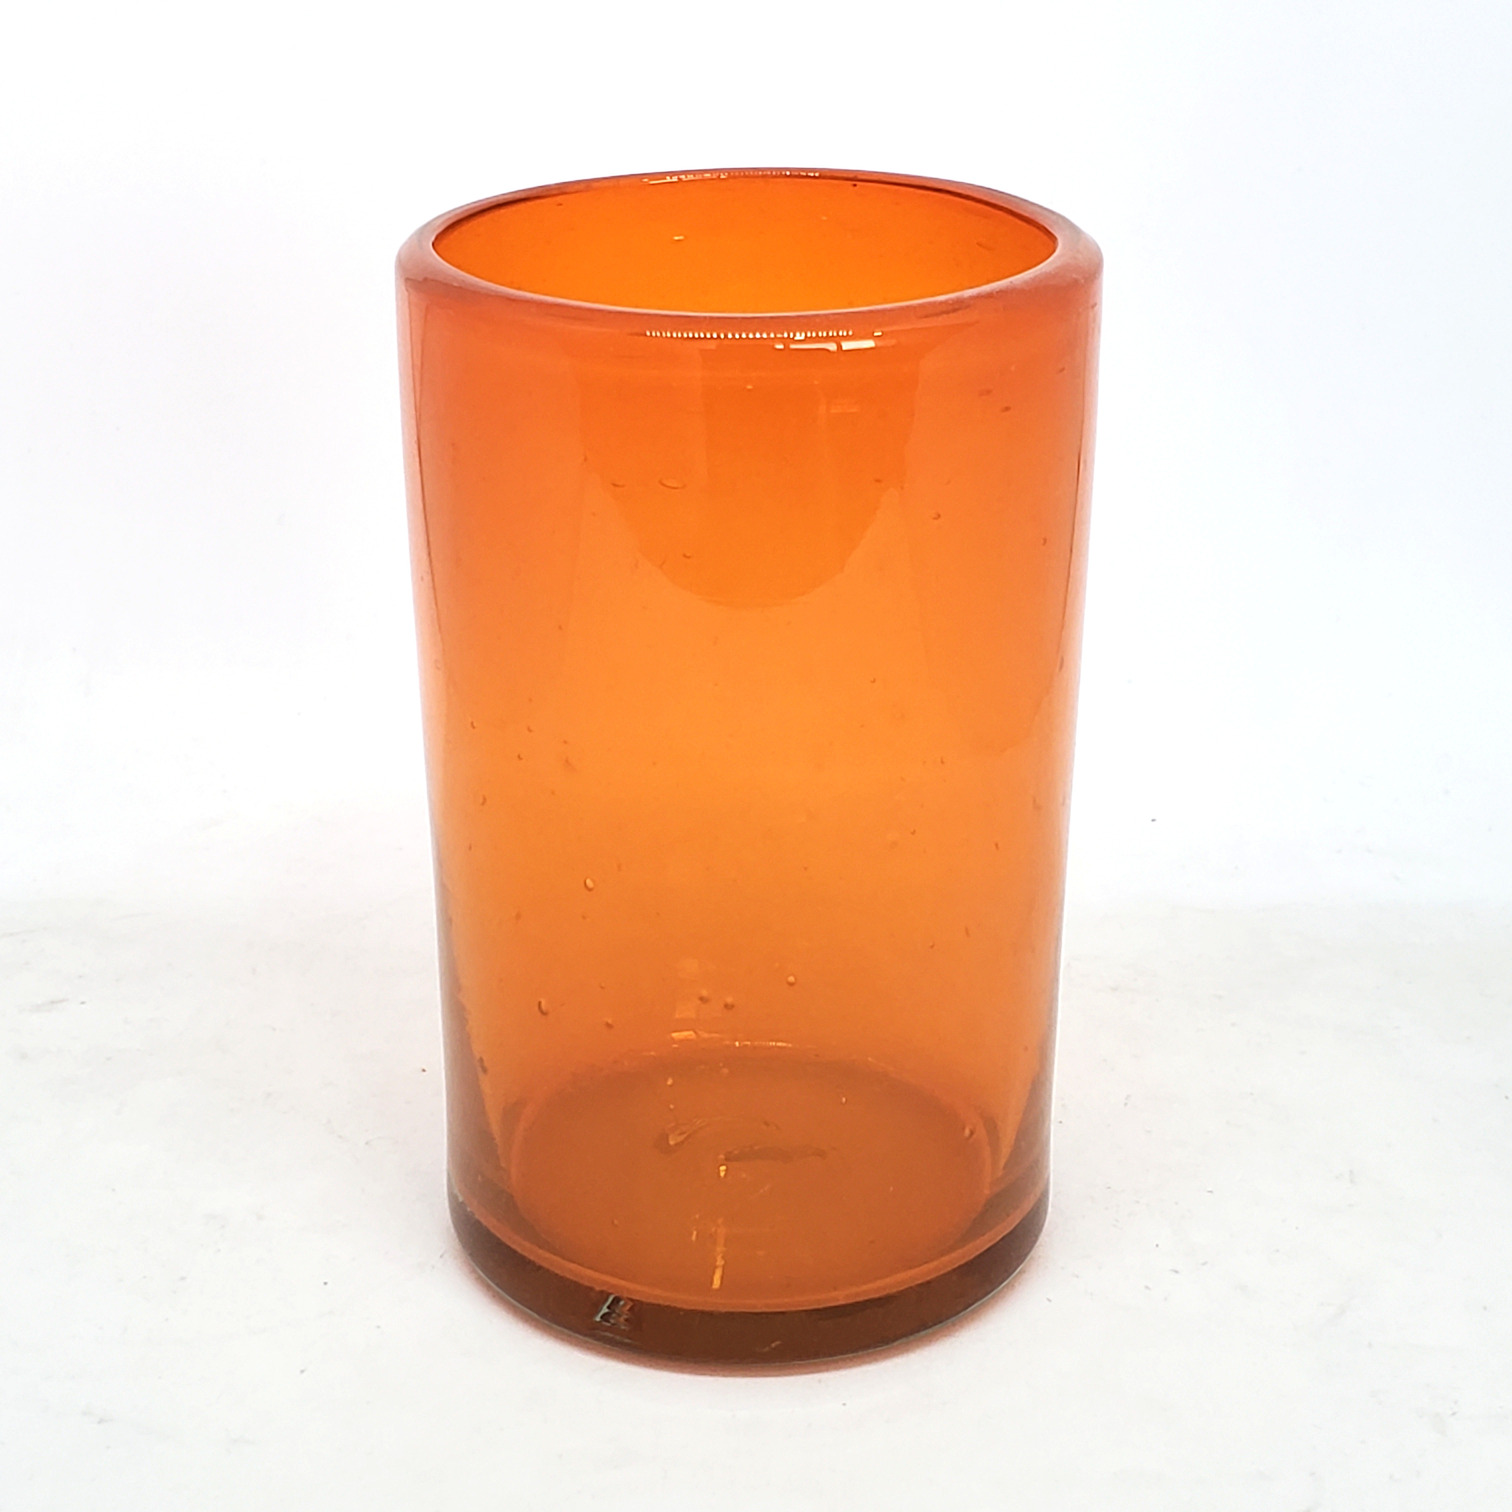 Wholesale Colored Glassware / Solid Orange 14 oz Drinking Glasses  / These handcrafted glasses deliver a classic touch to your favorite drink.